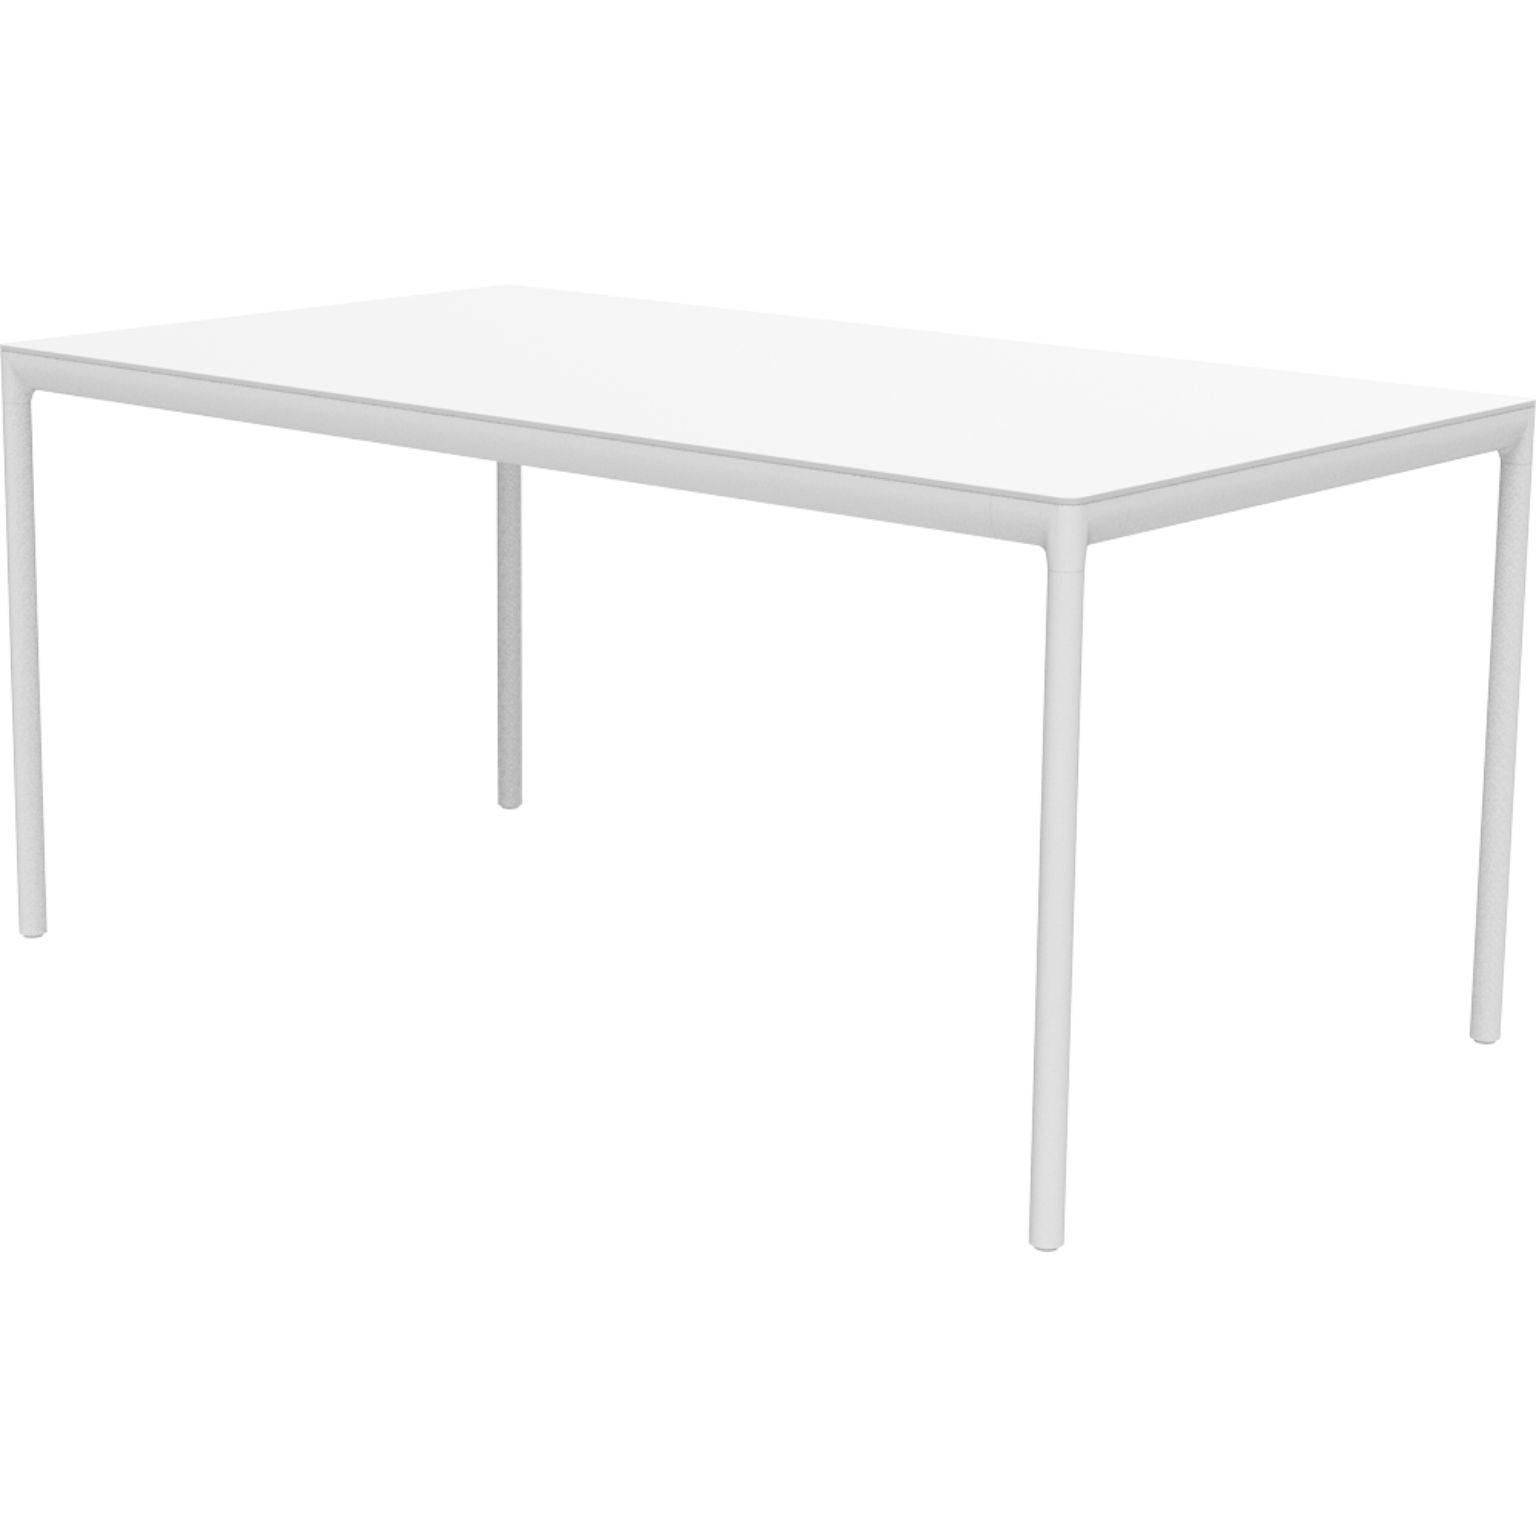 Ribbons White 160 Coffee Table by MOWEE.
Dimensions: D 90 x W 160 x H 75 cm
Material: Aluminum and HPL top.
Weight: 21 kg.
Also available in different colors and finishes. (HPL Black Edge or Neolith top).

An unmistakable collection for its beauty